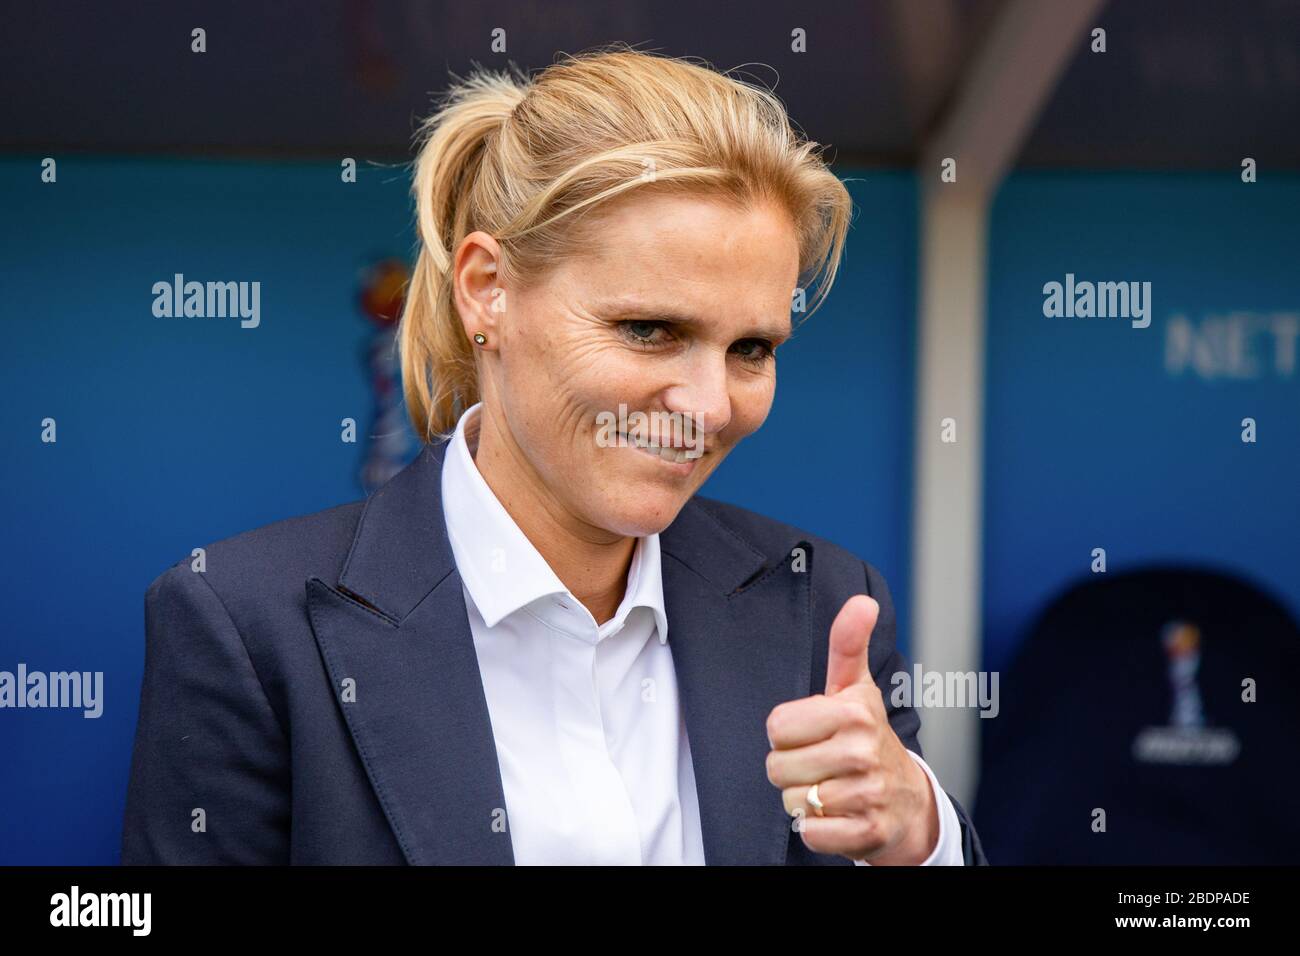 Sarina Wiegman coach of Netherlands during the 2019 FIFA Women's World Cup match between Netherlands and Canada at Stade Auguste-Delaune stadium.(Final score: Netherlands 2:1 Canada) Stock Photo